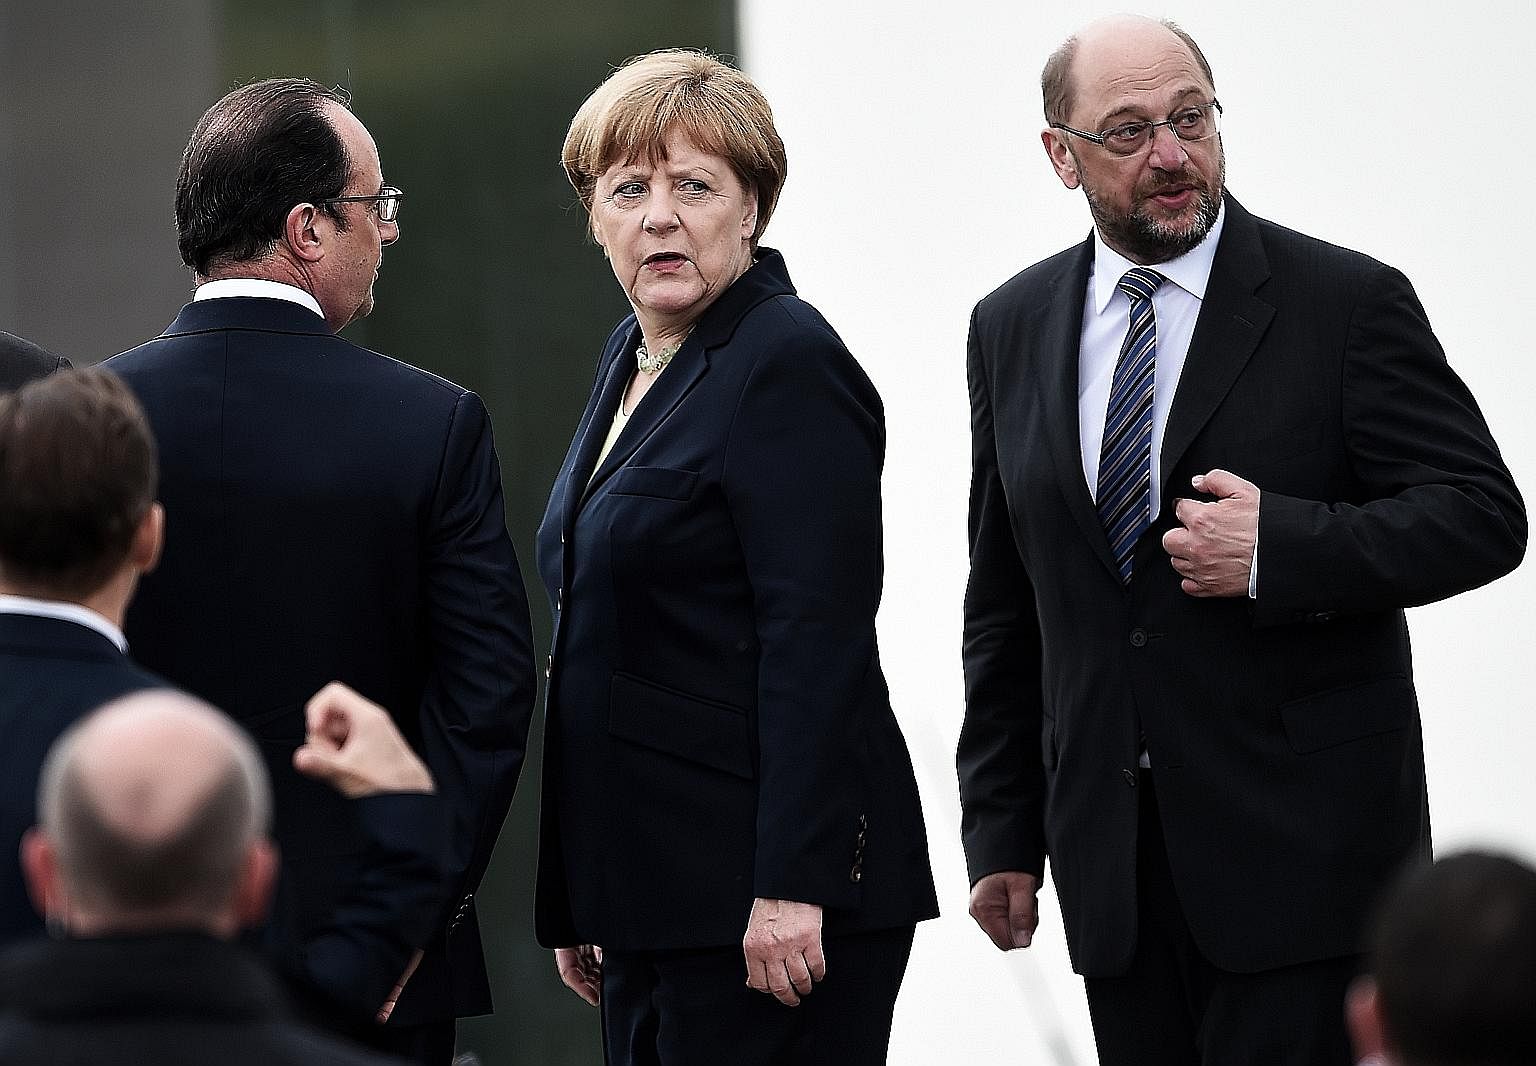 German Chancellor Angela Merkel, flanked by then French president Francois Hollande (left) and then European Parliament president Martin Schulz, at a ceremony last year in Douaumont, France, to mark the centenary of the Battle of Verdun. Mr Schulz's 